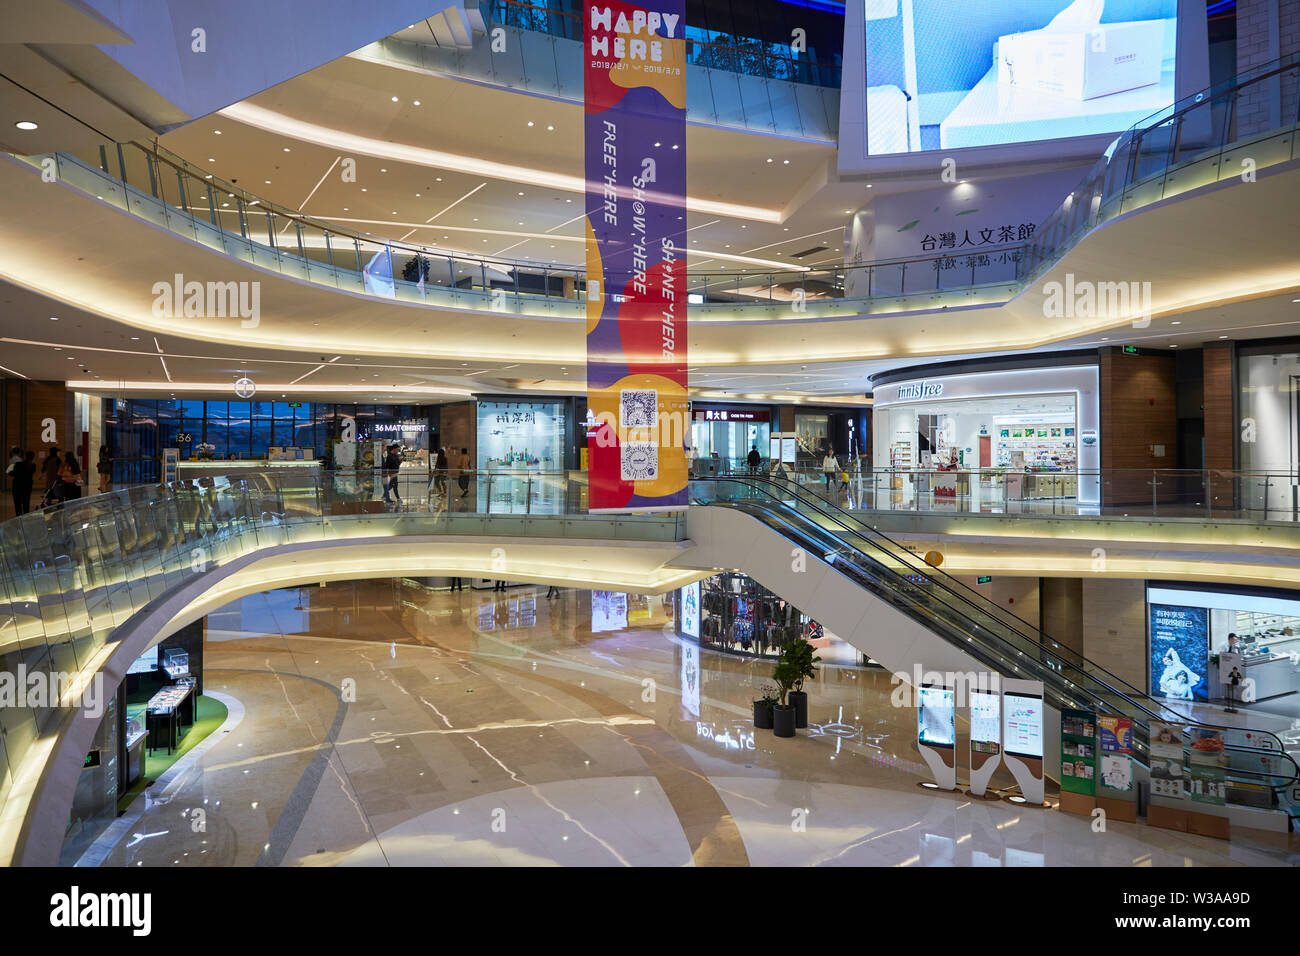 Interior of the O'Plaza shopping mall at OCT Harbour. Shenzhen, Guangdong Province, China. Stock Photo